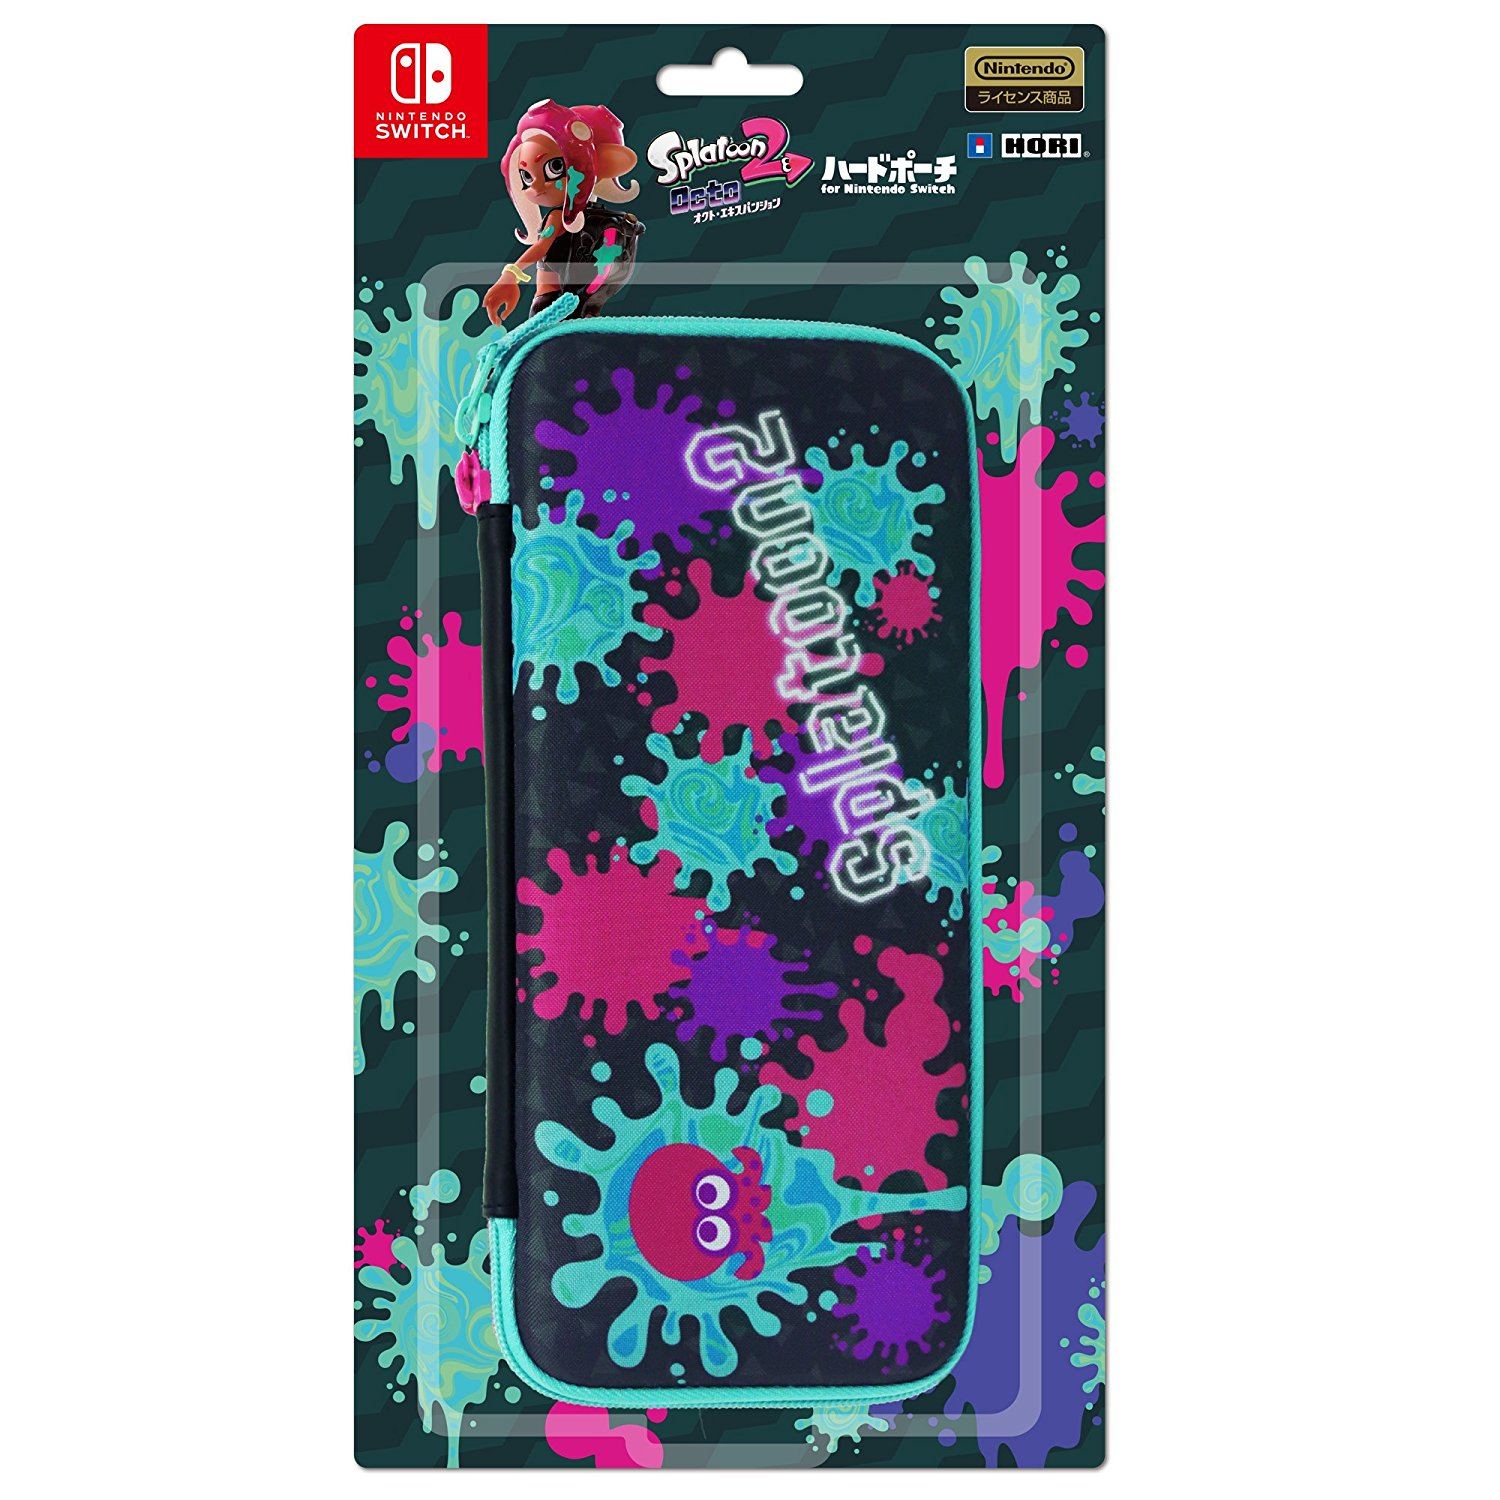 Nintendo (Inkling Squid) for Splatoon Switch 2 Pouch for Nintendo Hard Switch